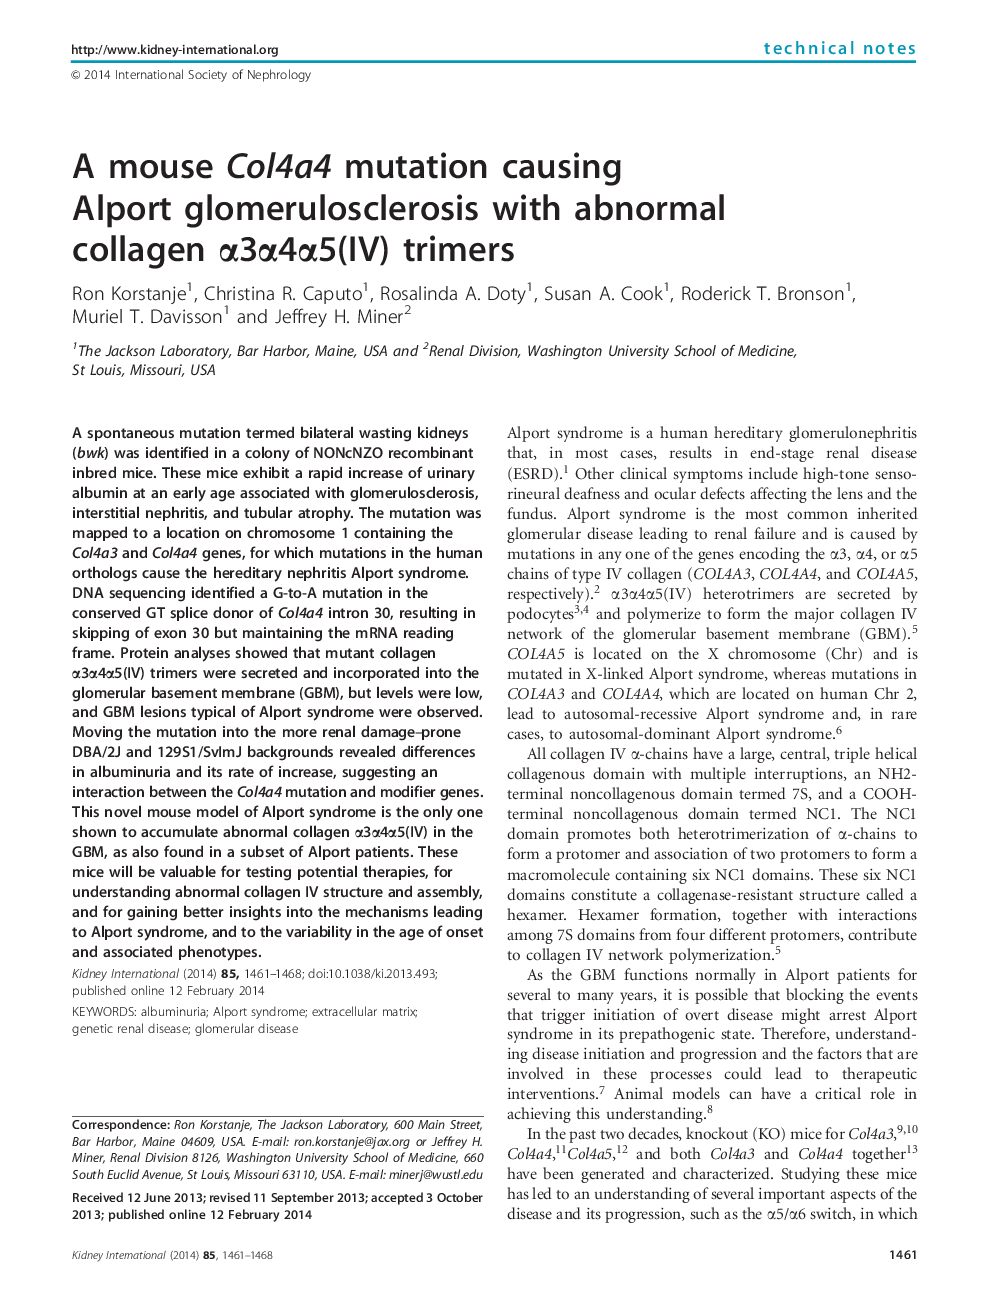 A mouse Col4a4 mutation causing Alport glomerulosclerosis with abnormal collagen Î±3Î±4Î±5(IV) trimers